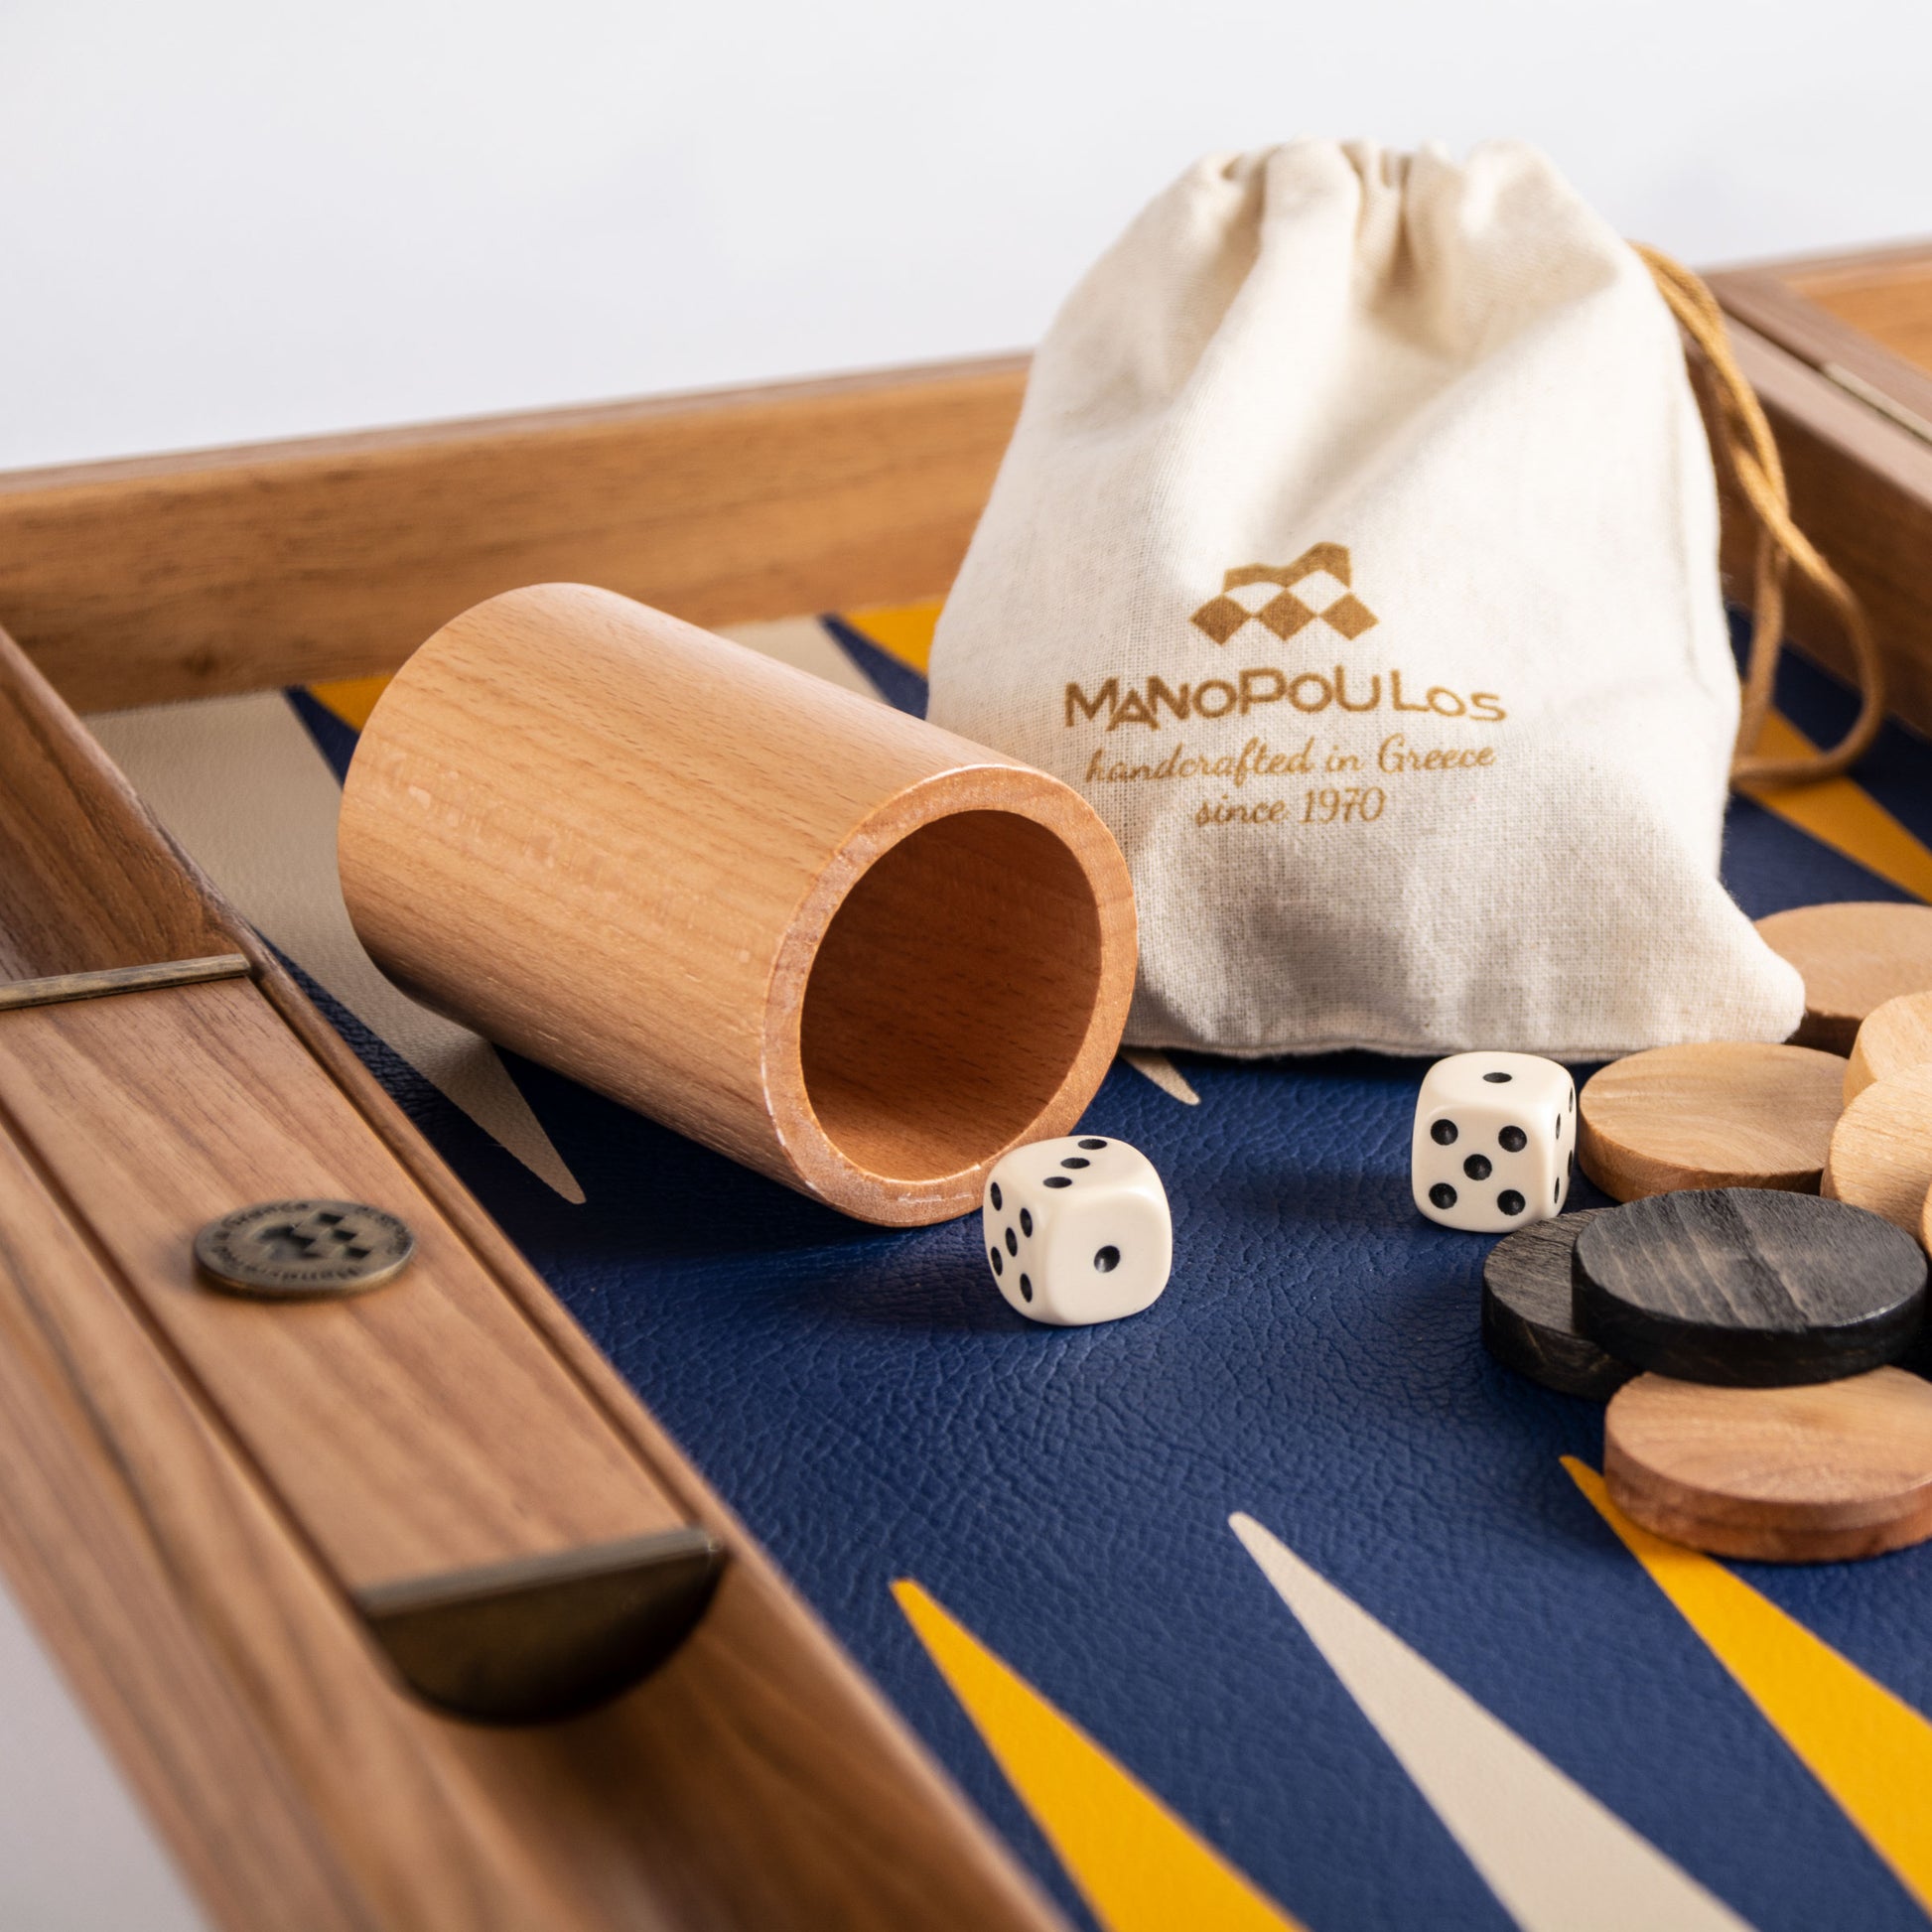 ROYAL BLUE Backgammon - Premium Backgammon from MANOPOULOS Chess & Backgammon - Just €175! Shop now at MANOPOULOS Chess & Backgammon